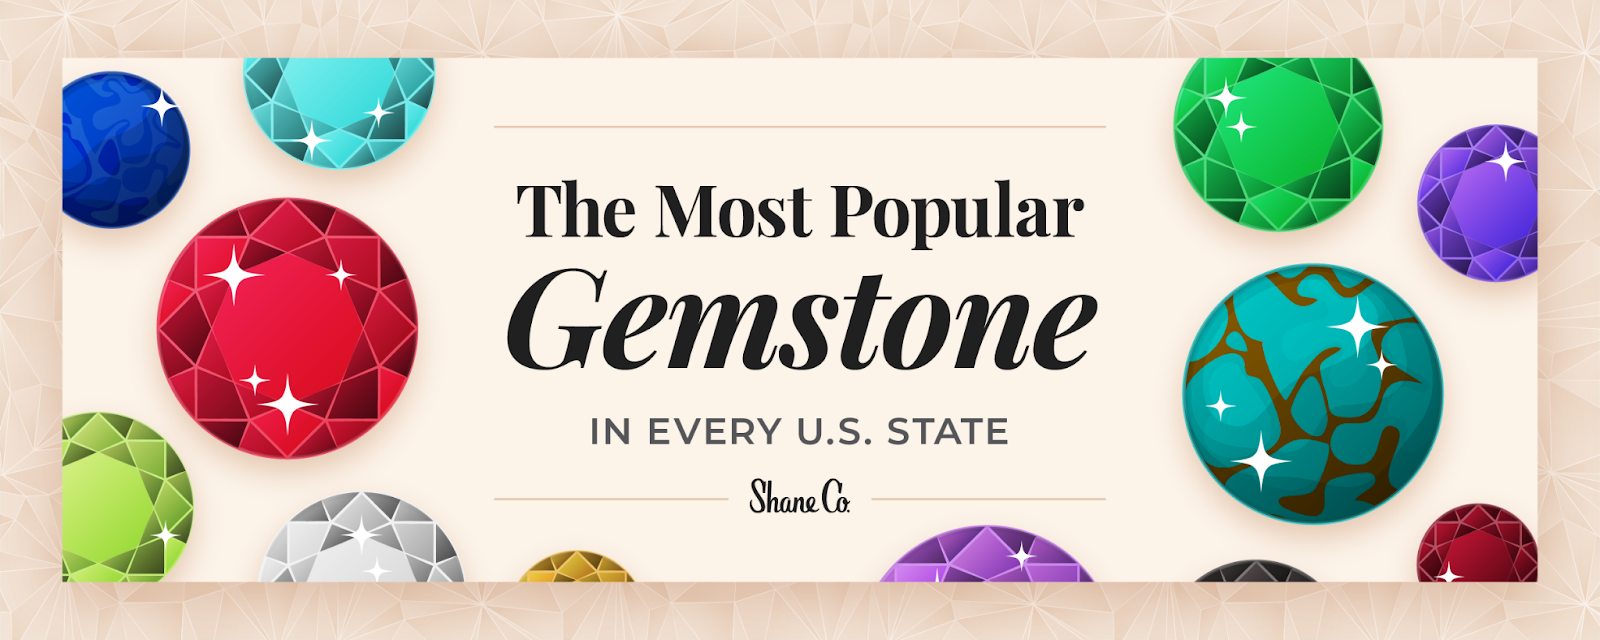 The Most Popular Gemstone in Every U.S. State